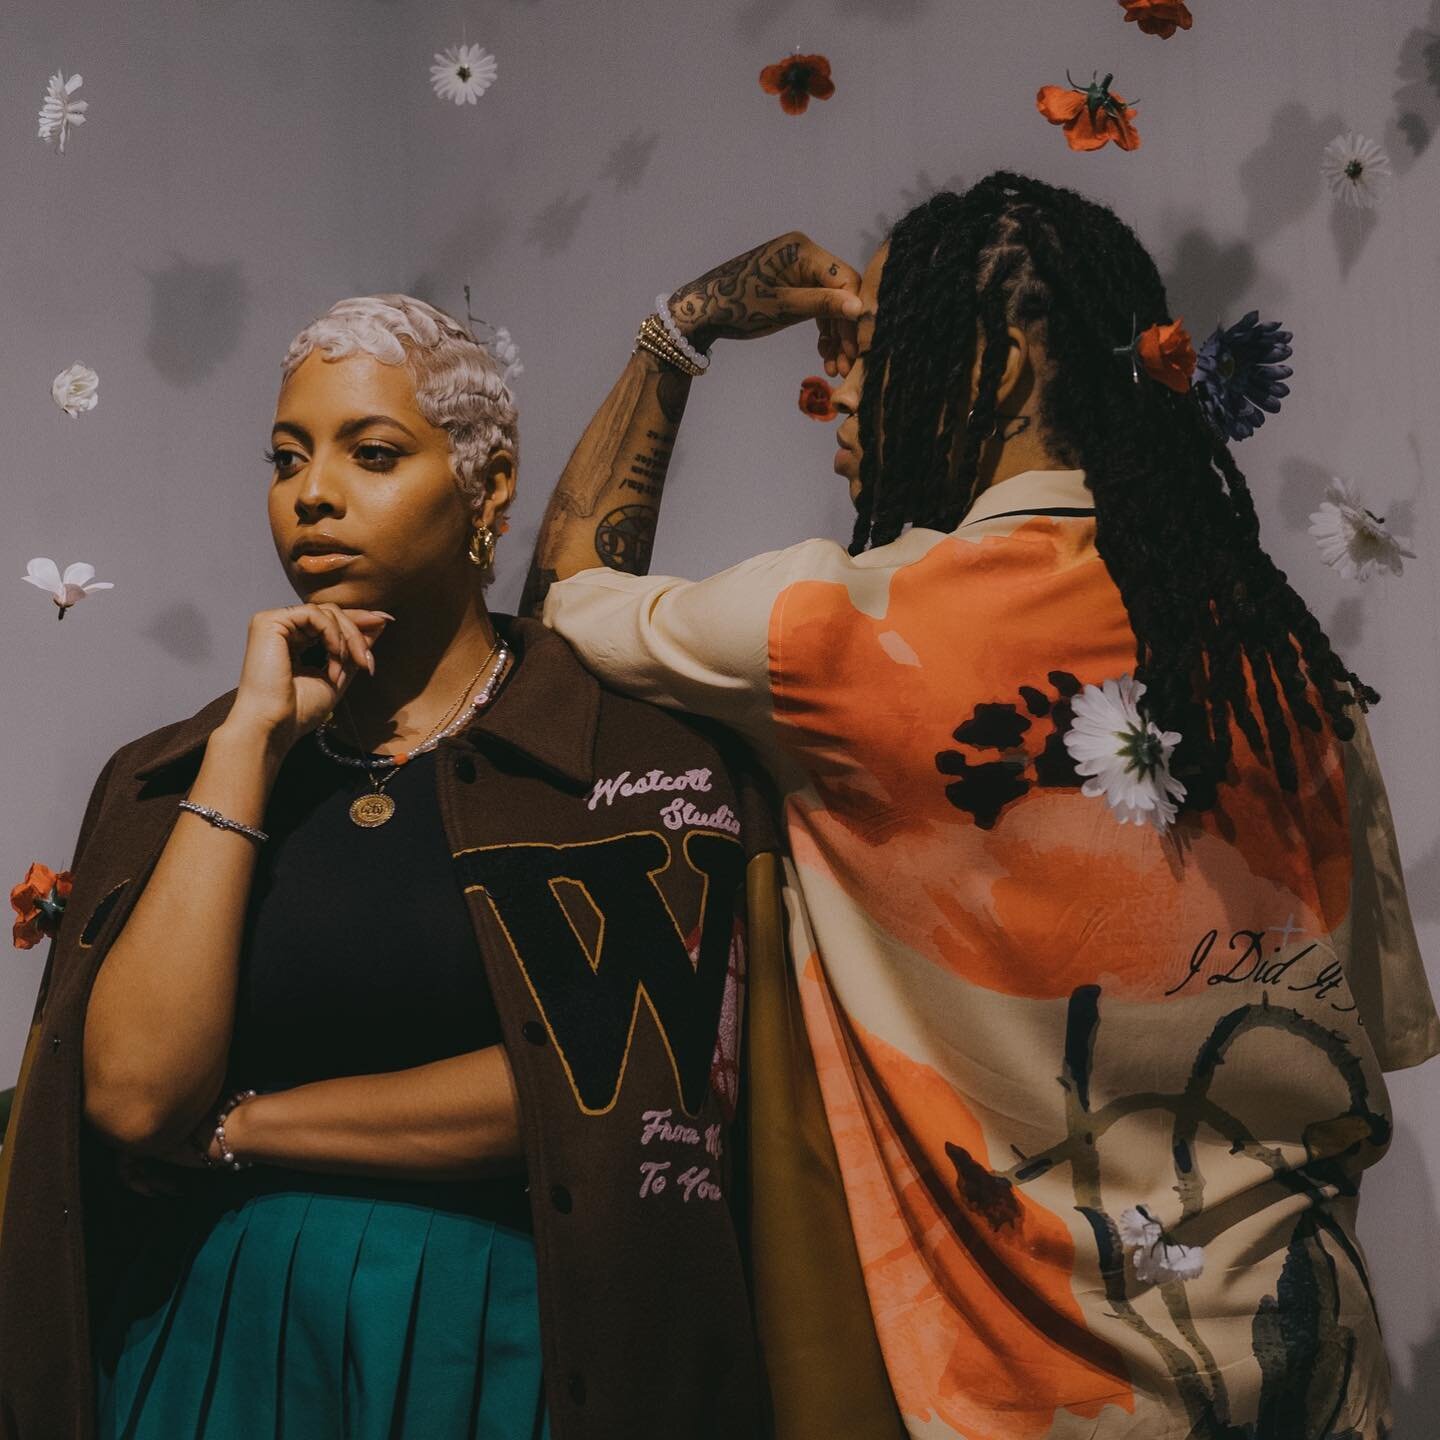 &ldquo;Being deeply loved by someone gives you strength, while loving someone deeply gives you courage.&rdquo;
&mdash; Lao Tzu

Mint Collection 
Available for Preorder now

Models: @shaddah_elyse @djfanniemae 
Photographer: @mmxnc_ 
Jewelry: @crystyl